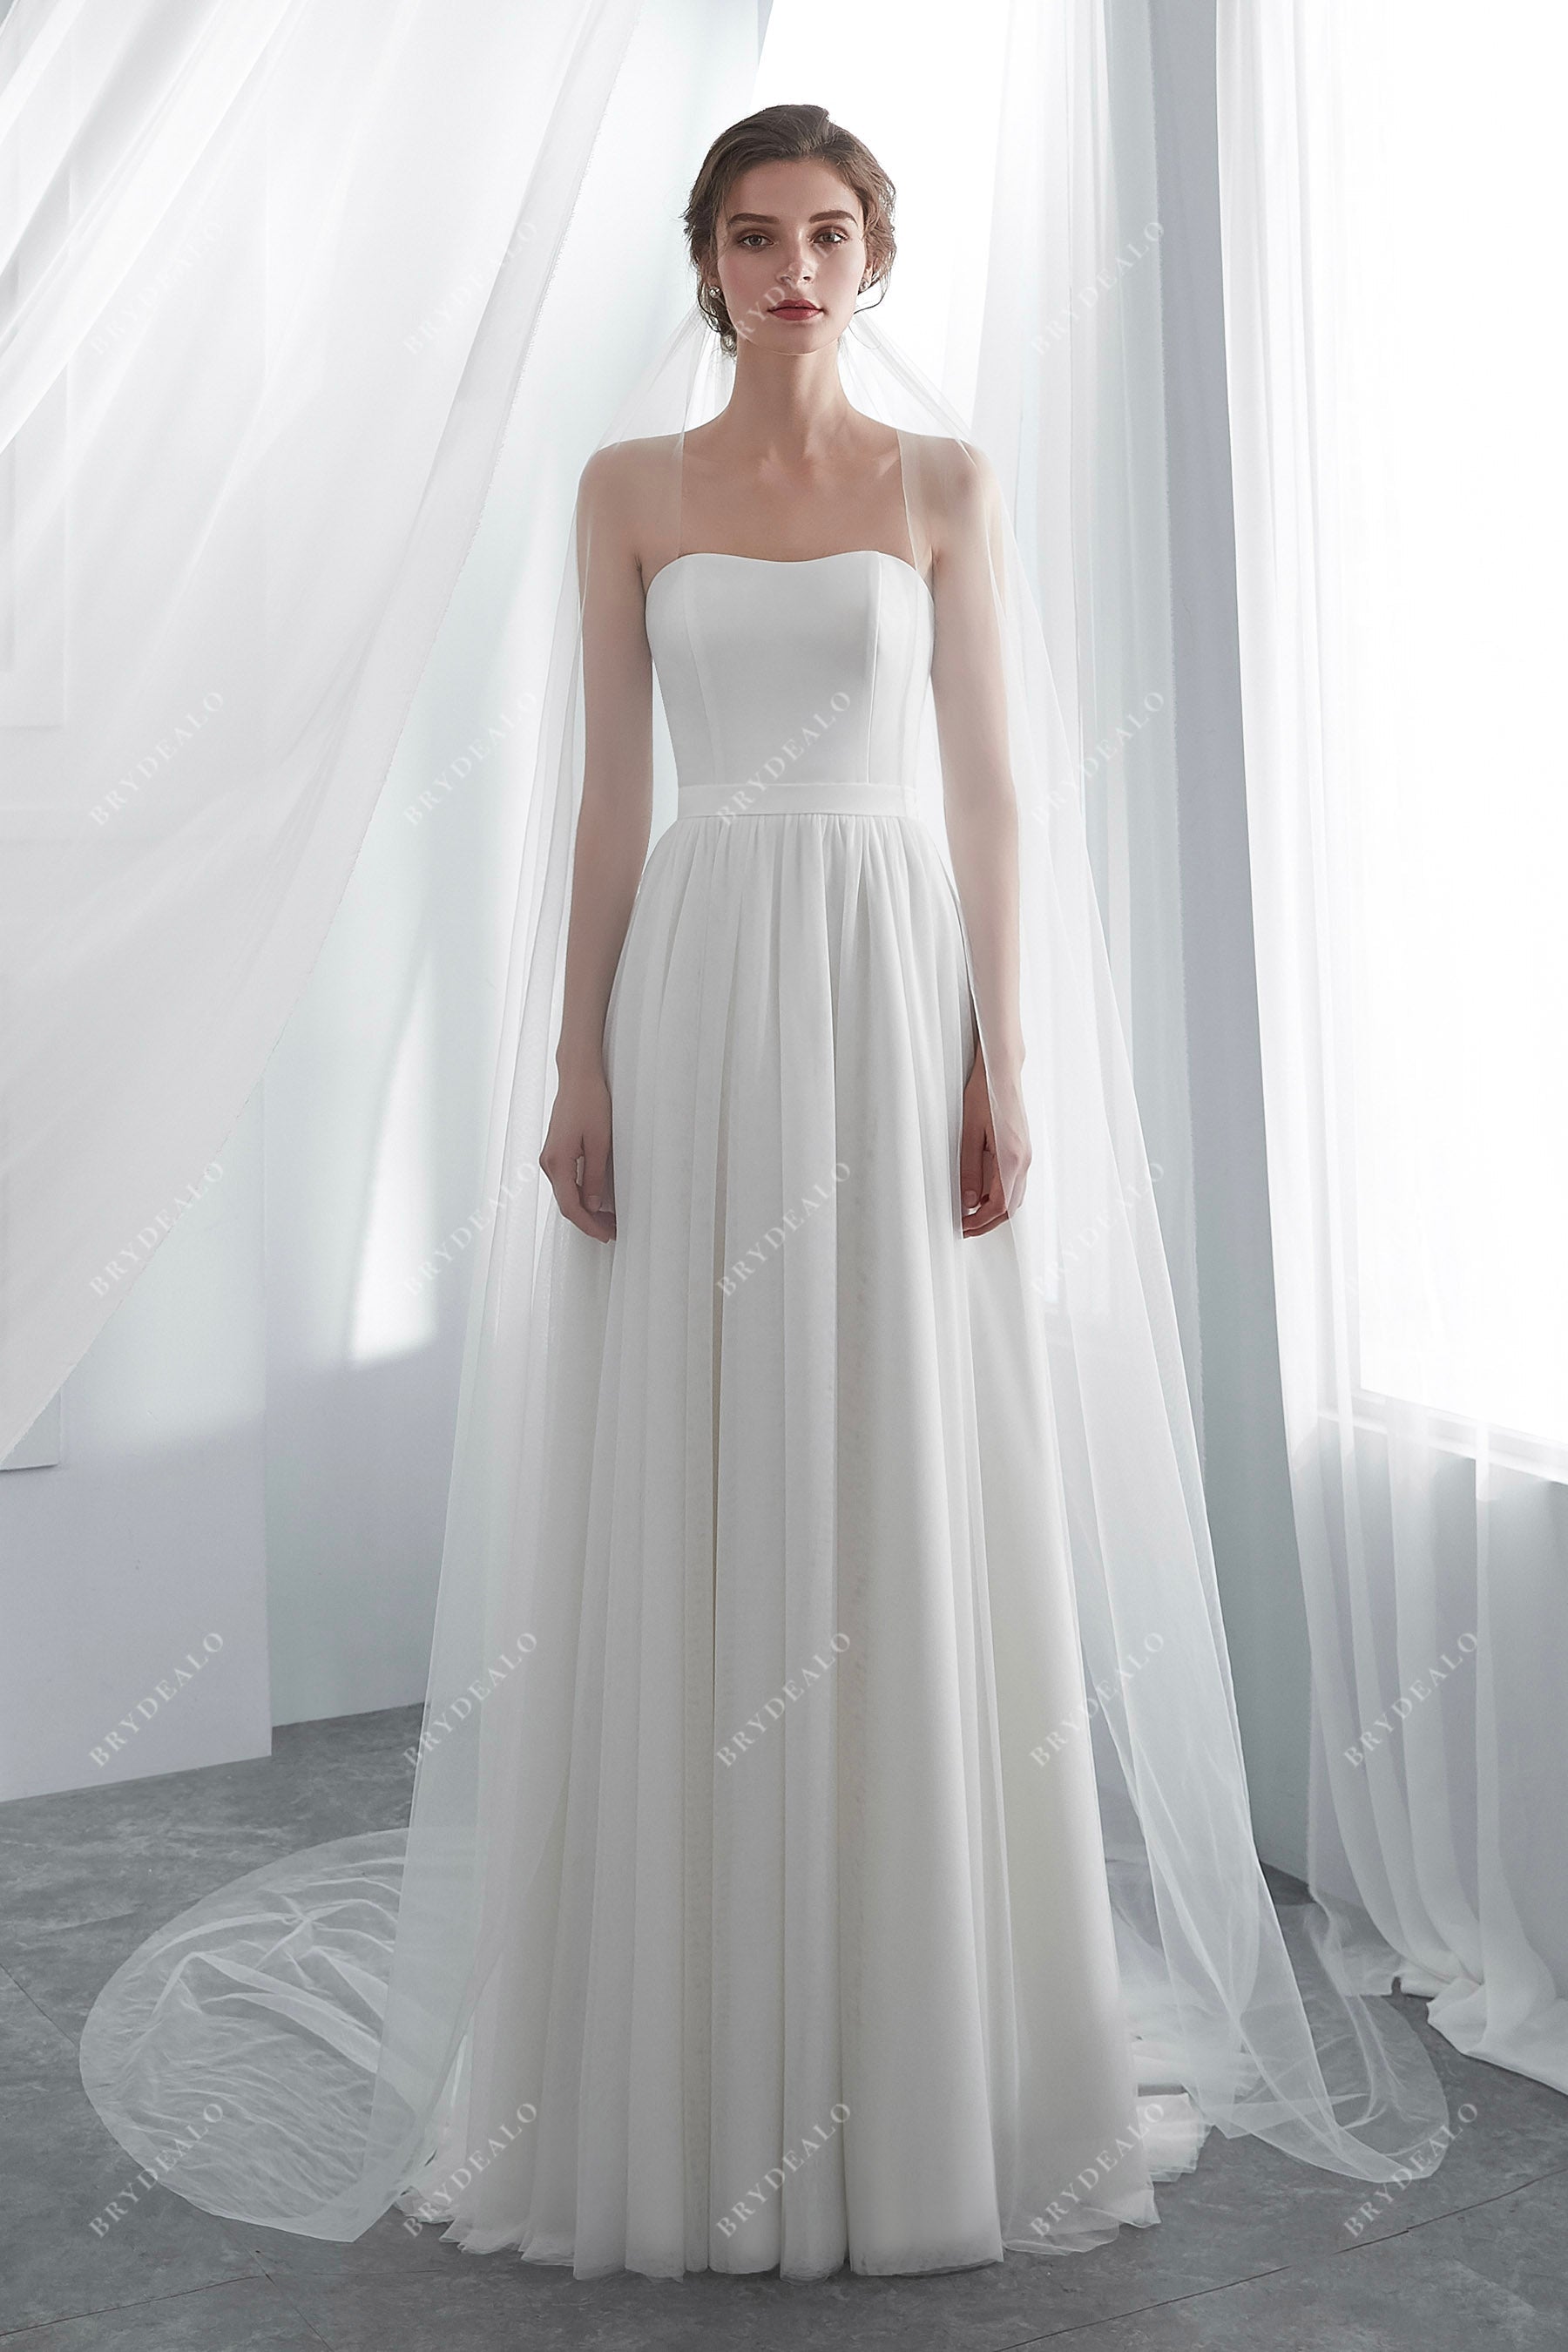 Strapless Ivory Net Summer A-line Bridal Gown